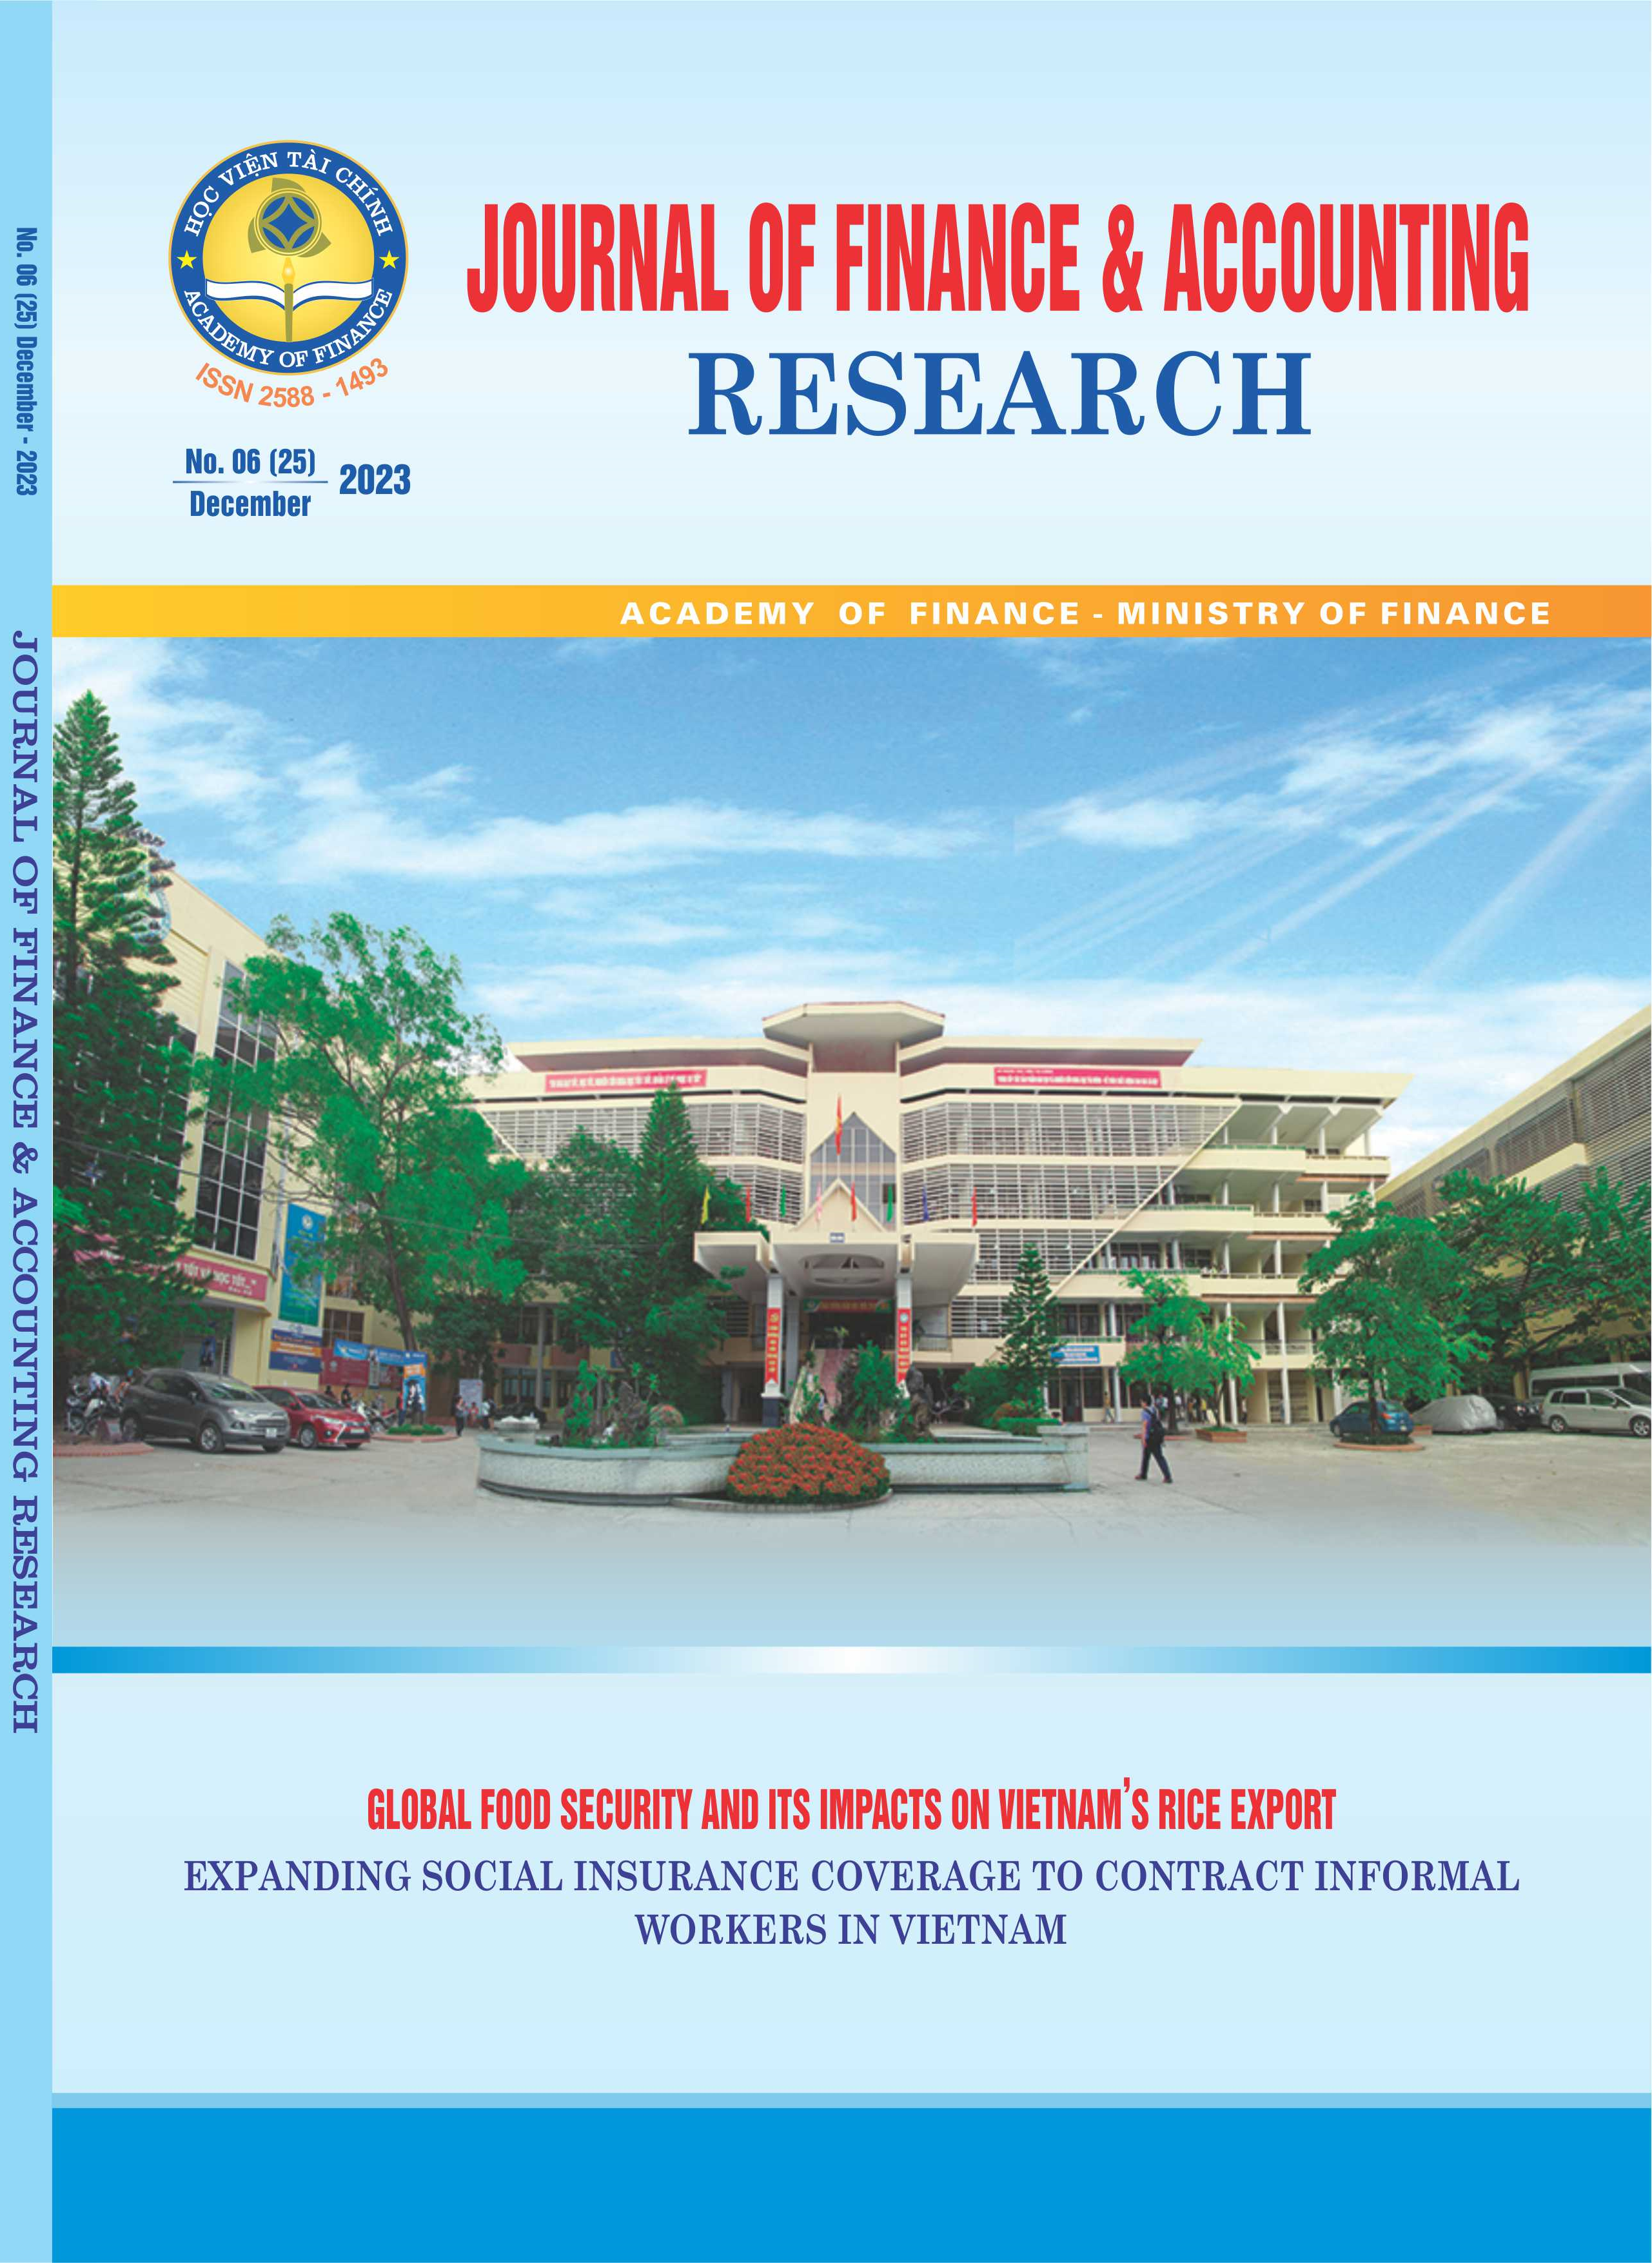 Journal of Finance & Accounting Research